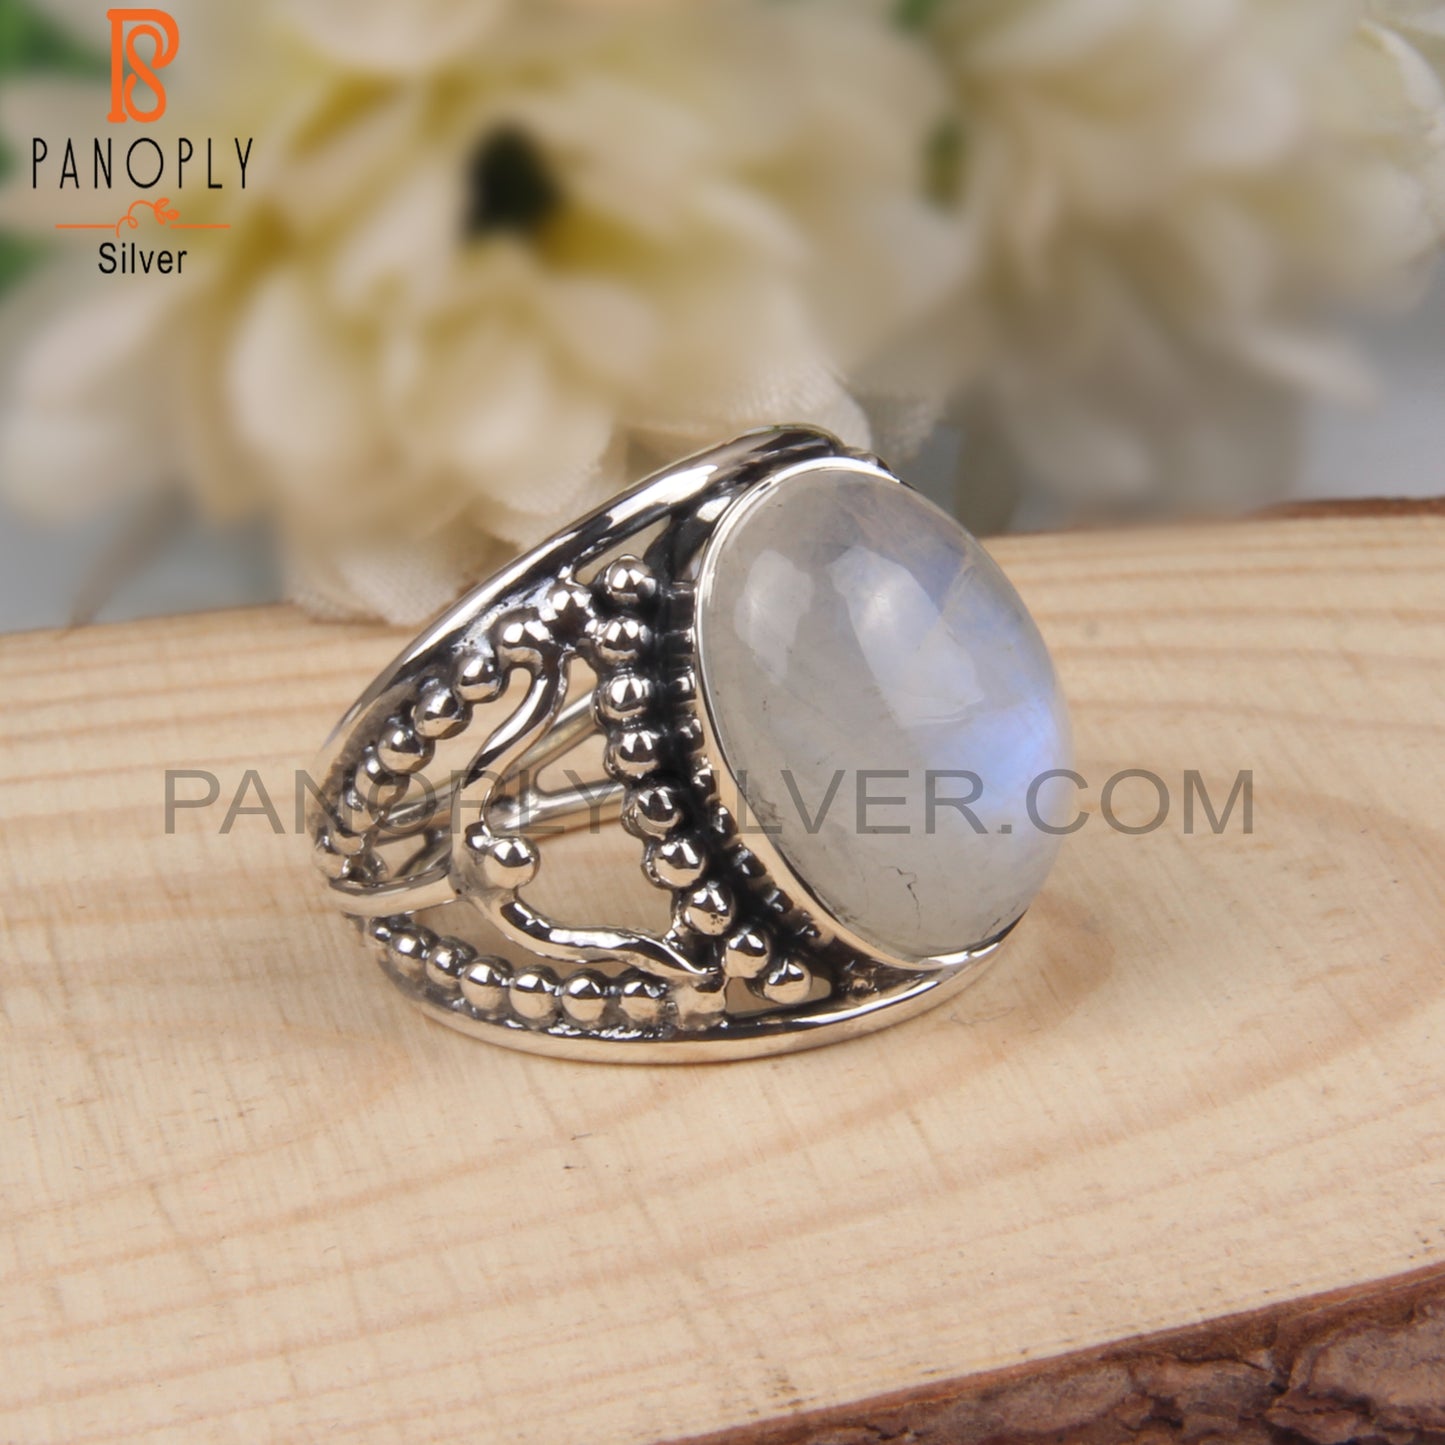 Rainbow Moonstone Oval Cut 925 Sterling Silver Ring